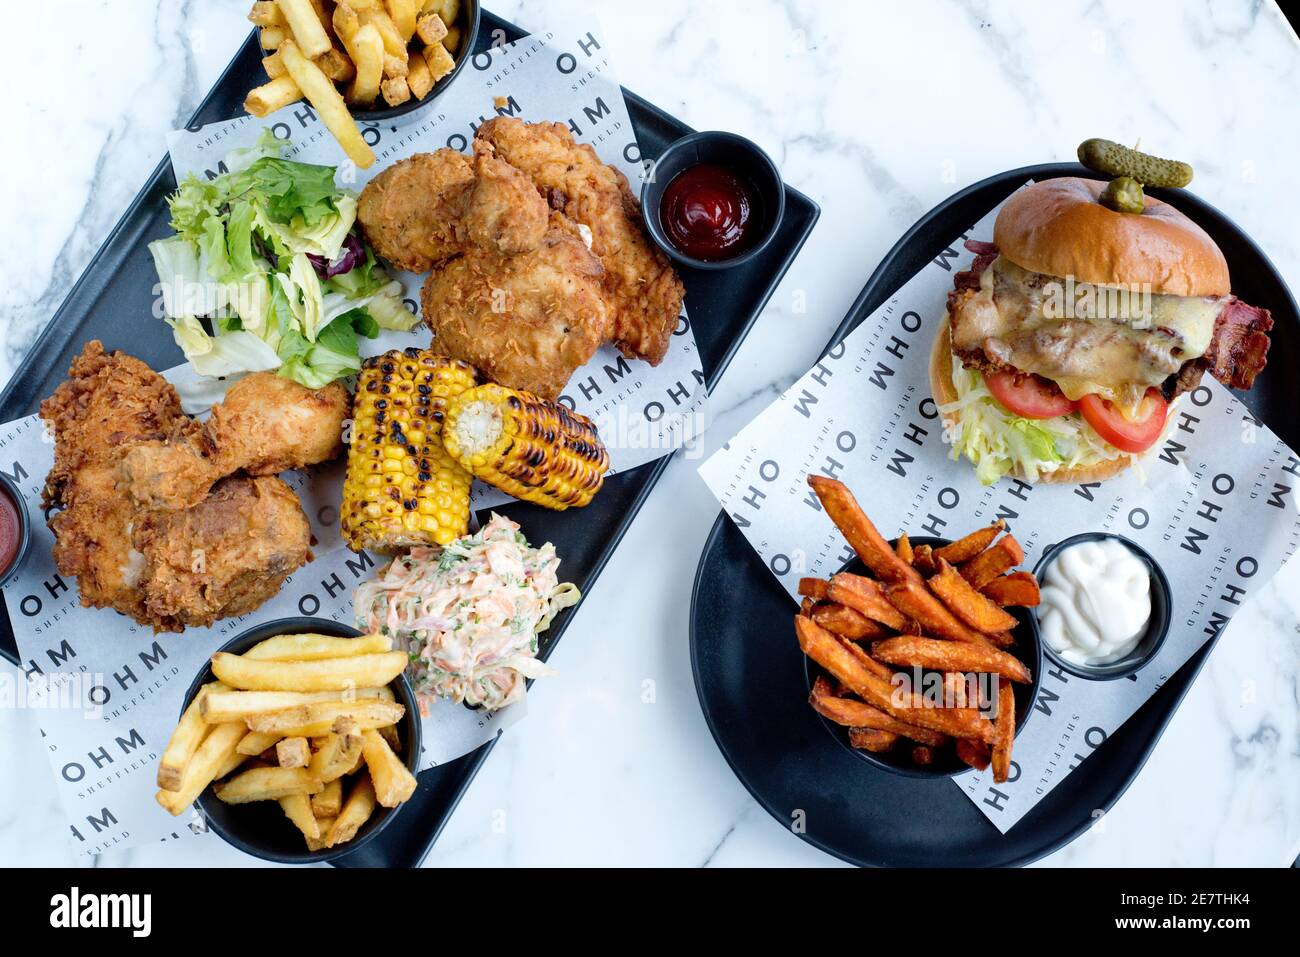 Sheffield, UK - 03 Aug 2017: Burger & friesa & a southern fried chicken share platter with coleslaw and sweetcorn at OHM, Fitzwilliam Street Stock Photo